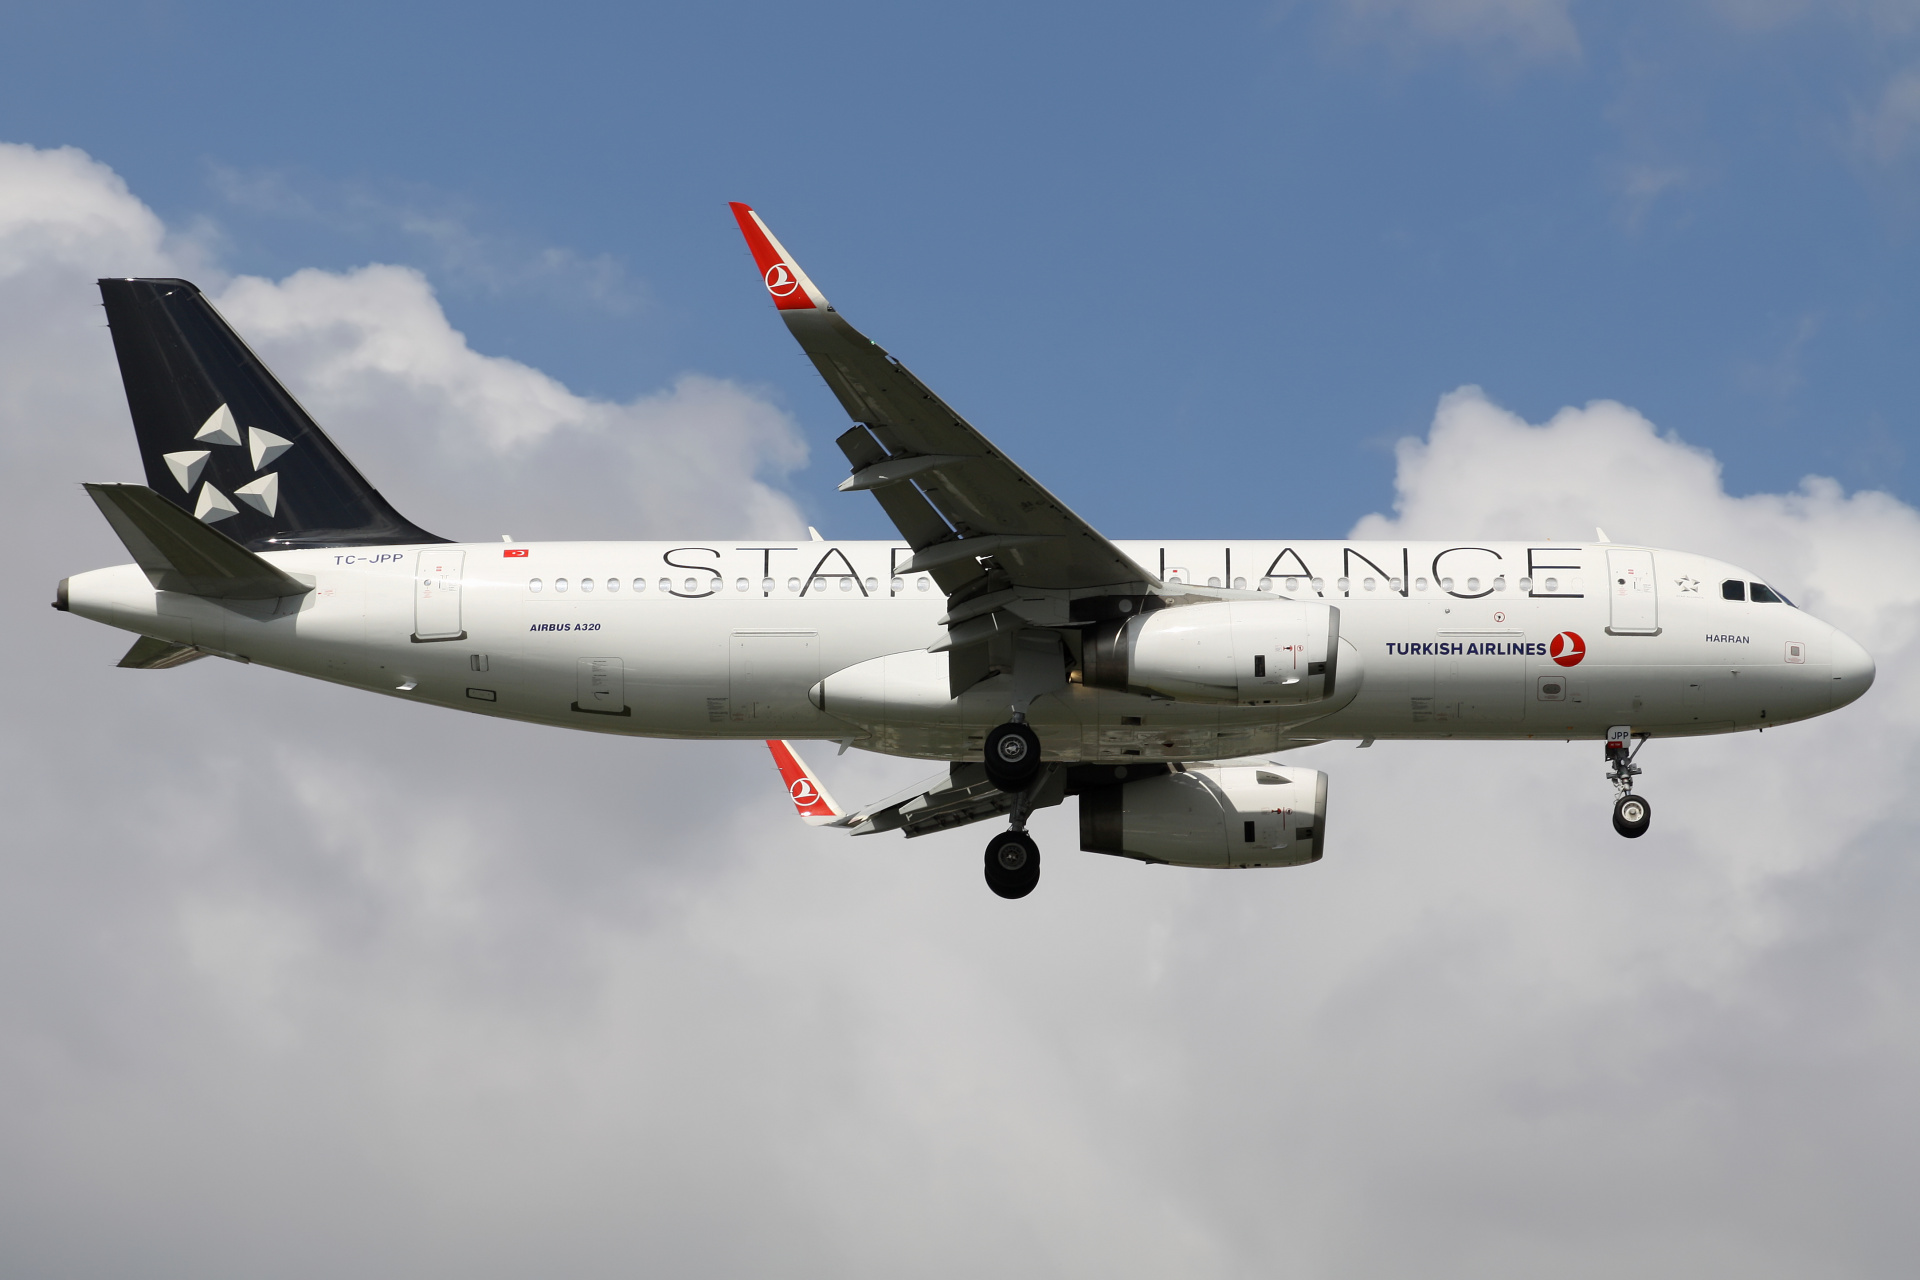 TC-JPP, THY Turkish Airlines (Star Alliance livery) (Aircraft » Istanbul Atatürk Airport » Airbus A320-200)